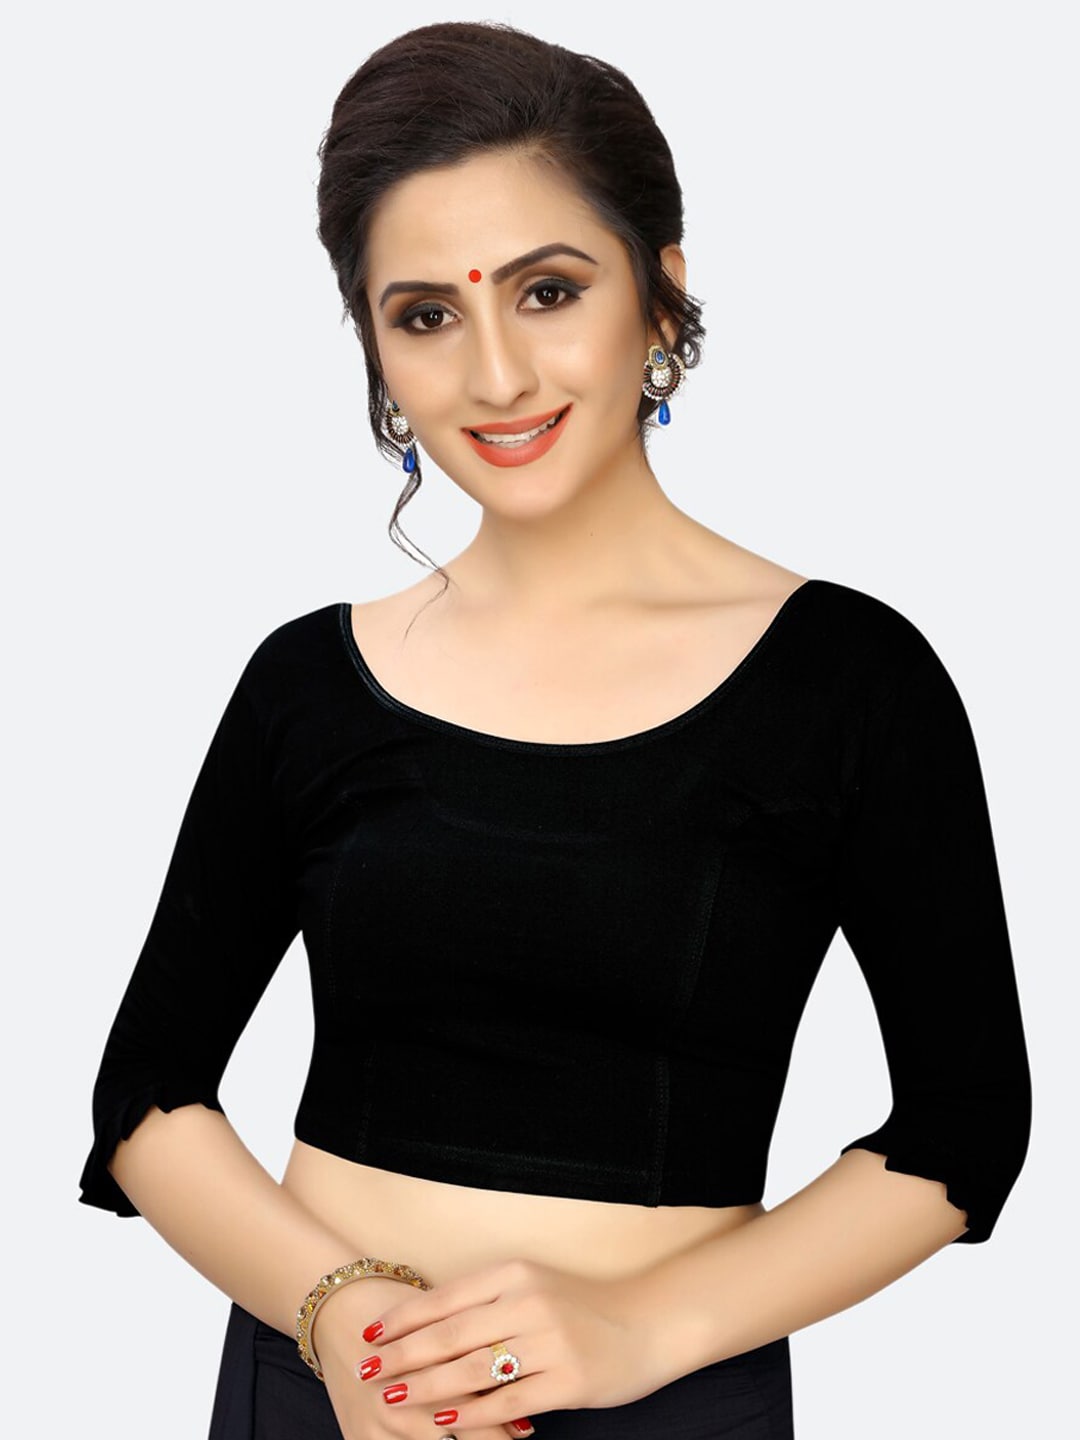 SIRIL Women Black Solid Saree Blouse Price in India